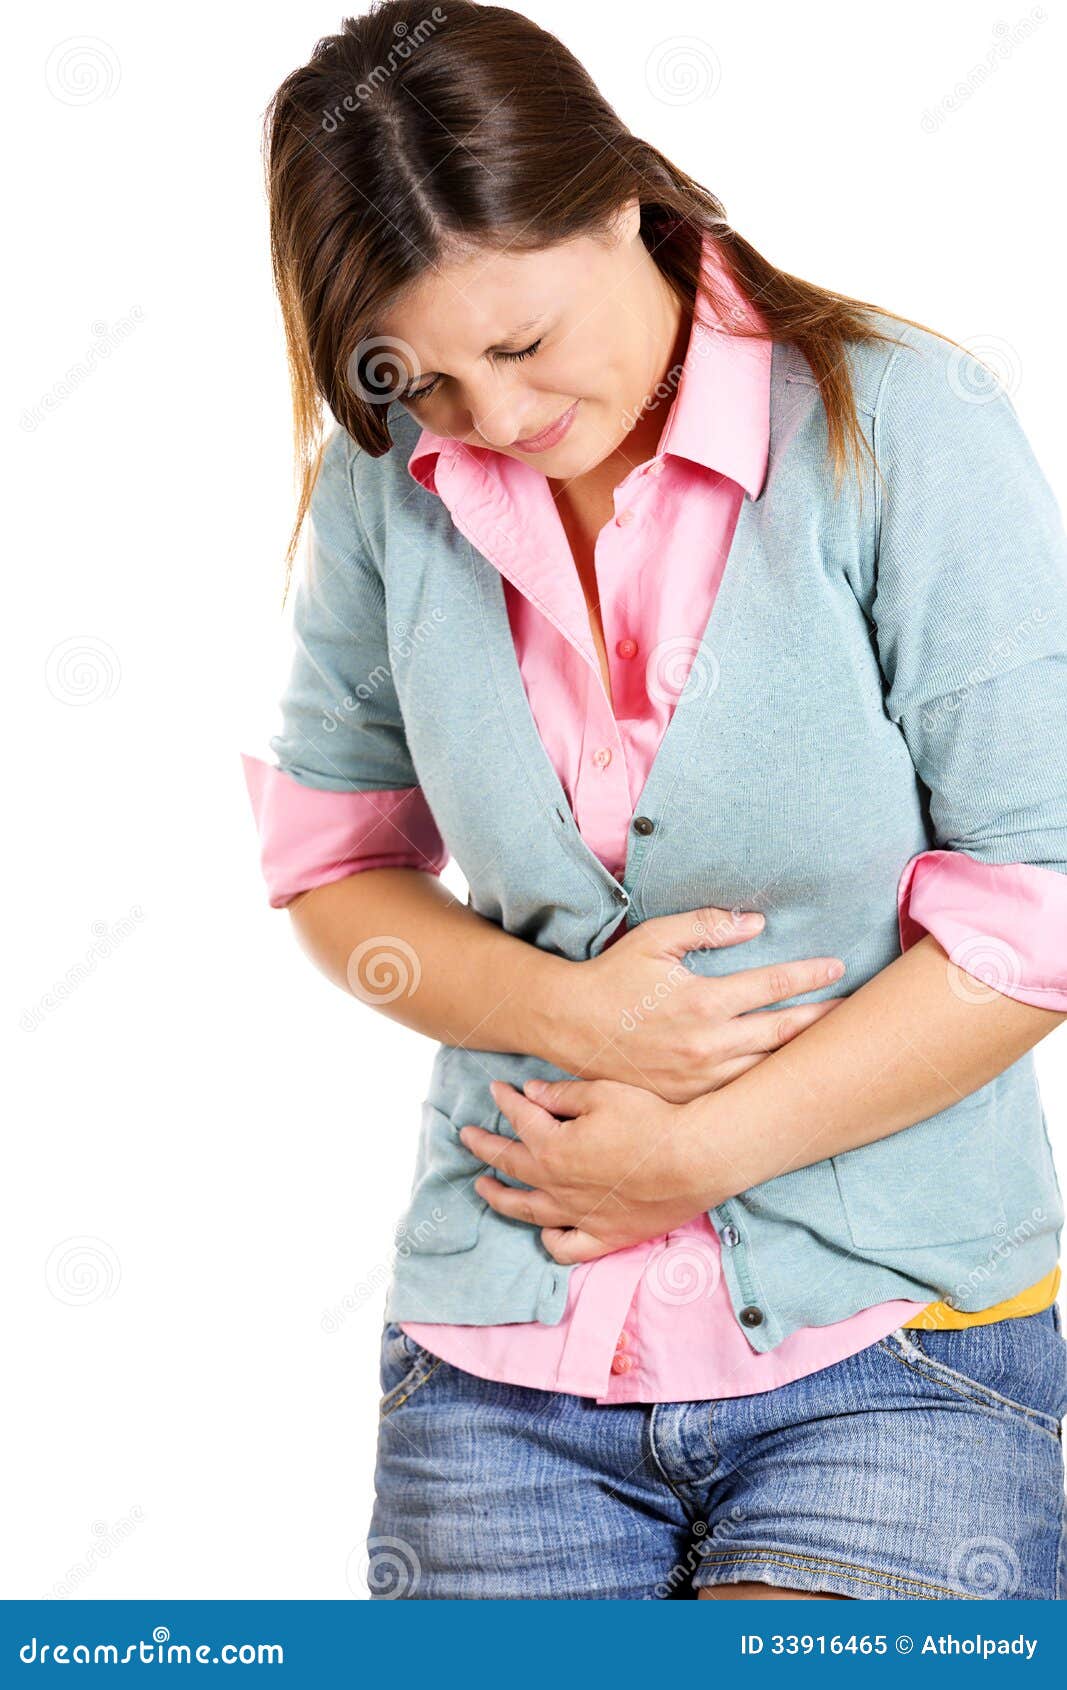 does prilosec cause stomach cramps